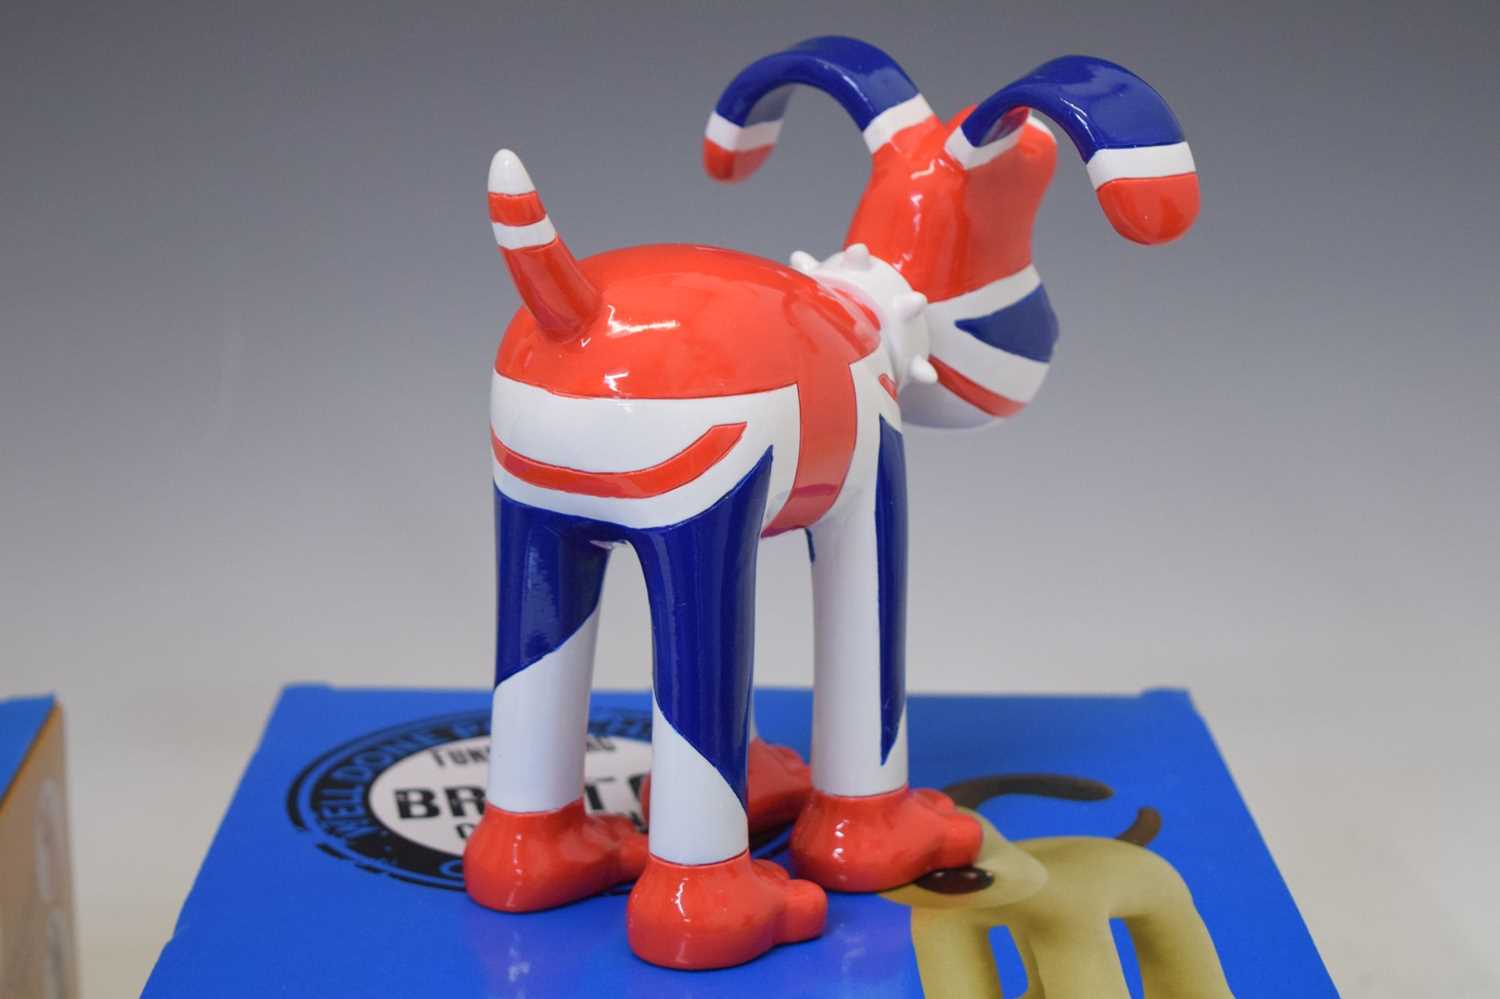 Aardman/Wallace and Gromit - 'Gromit Unleashed' figures - Image 6 of 8